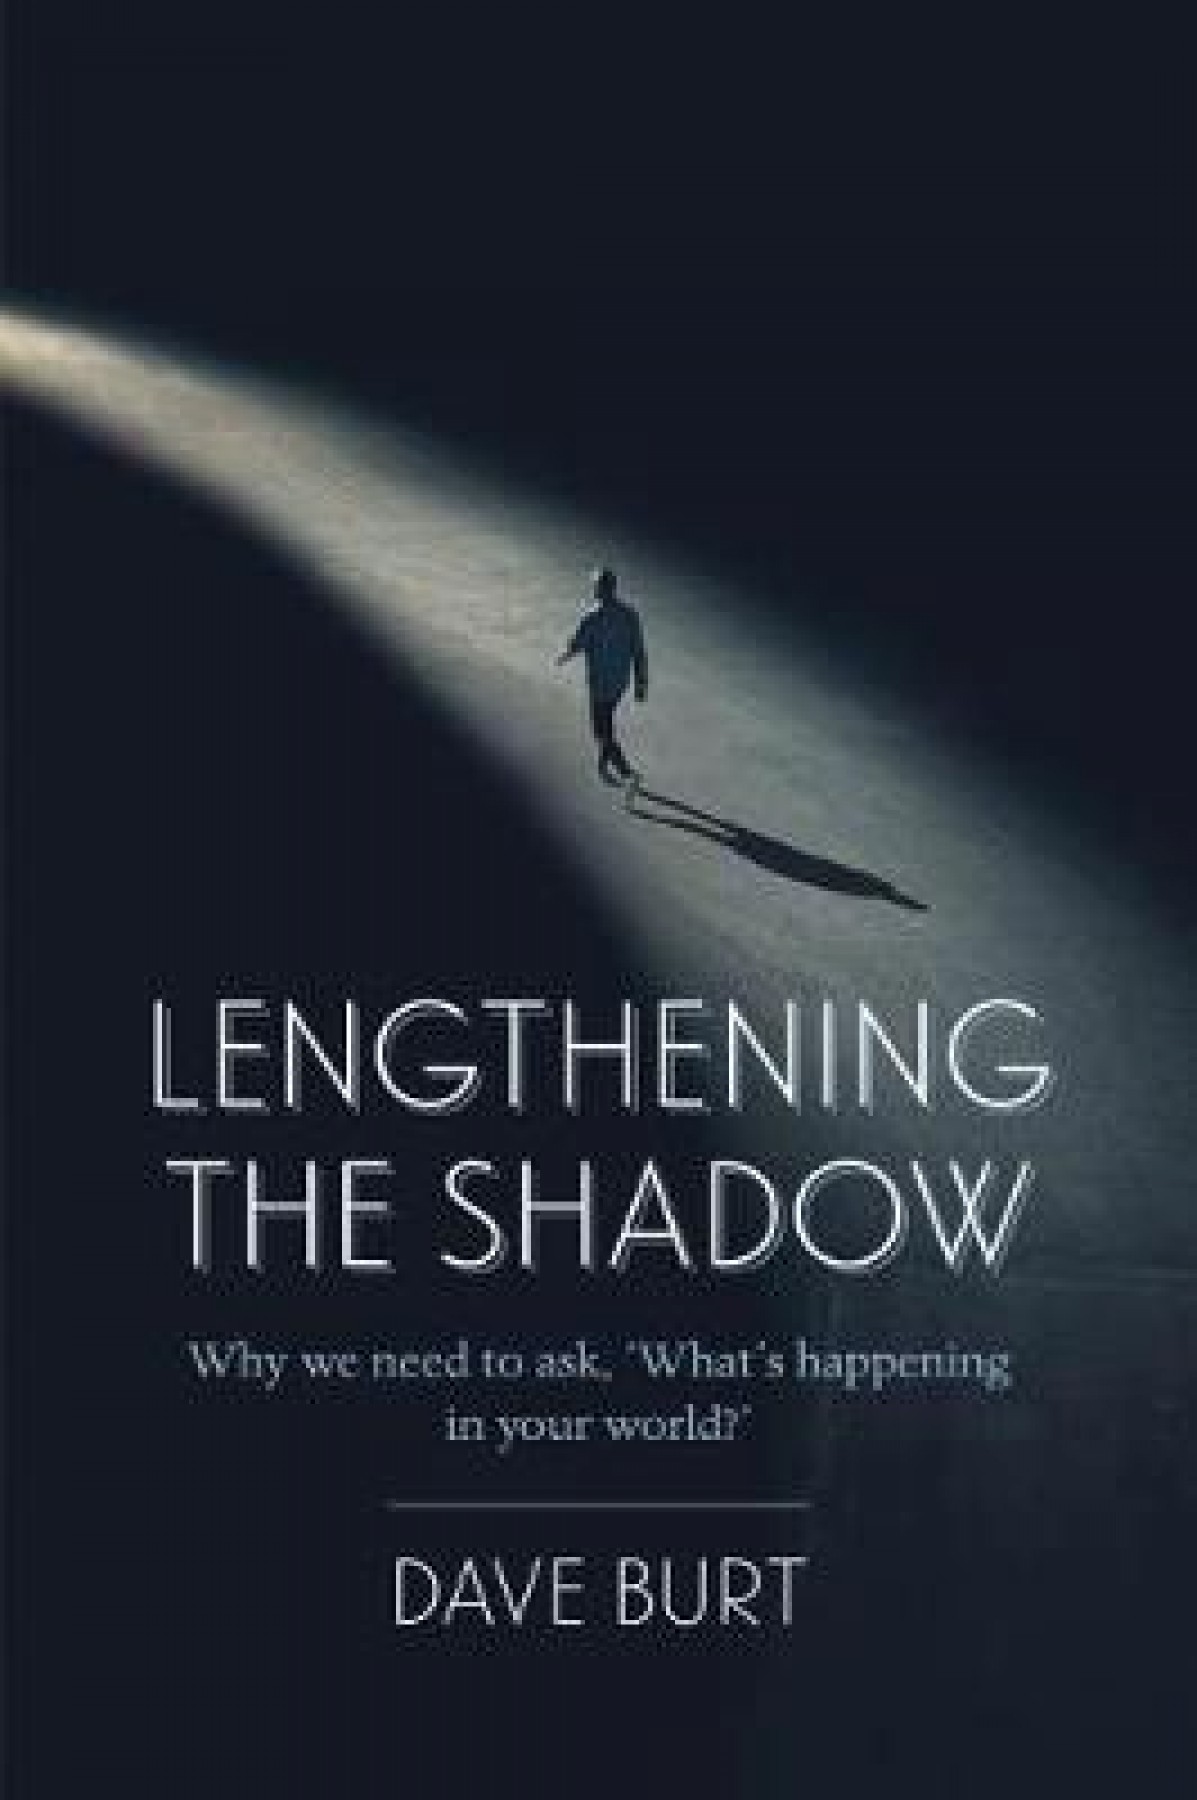 Lengthening the shadow: Why we need to ask, "What's happening in your world?”